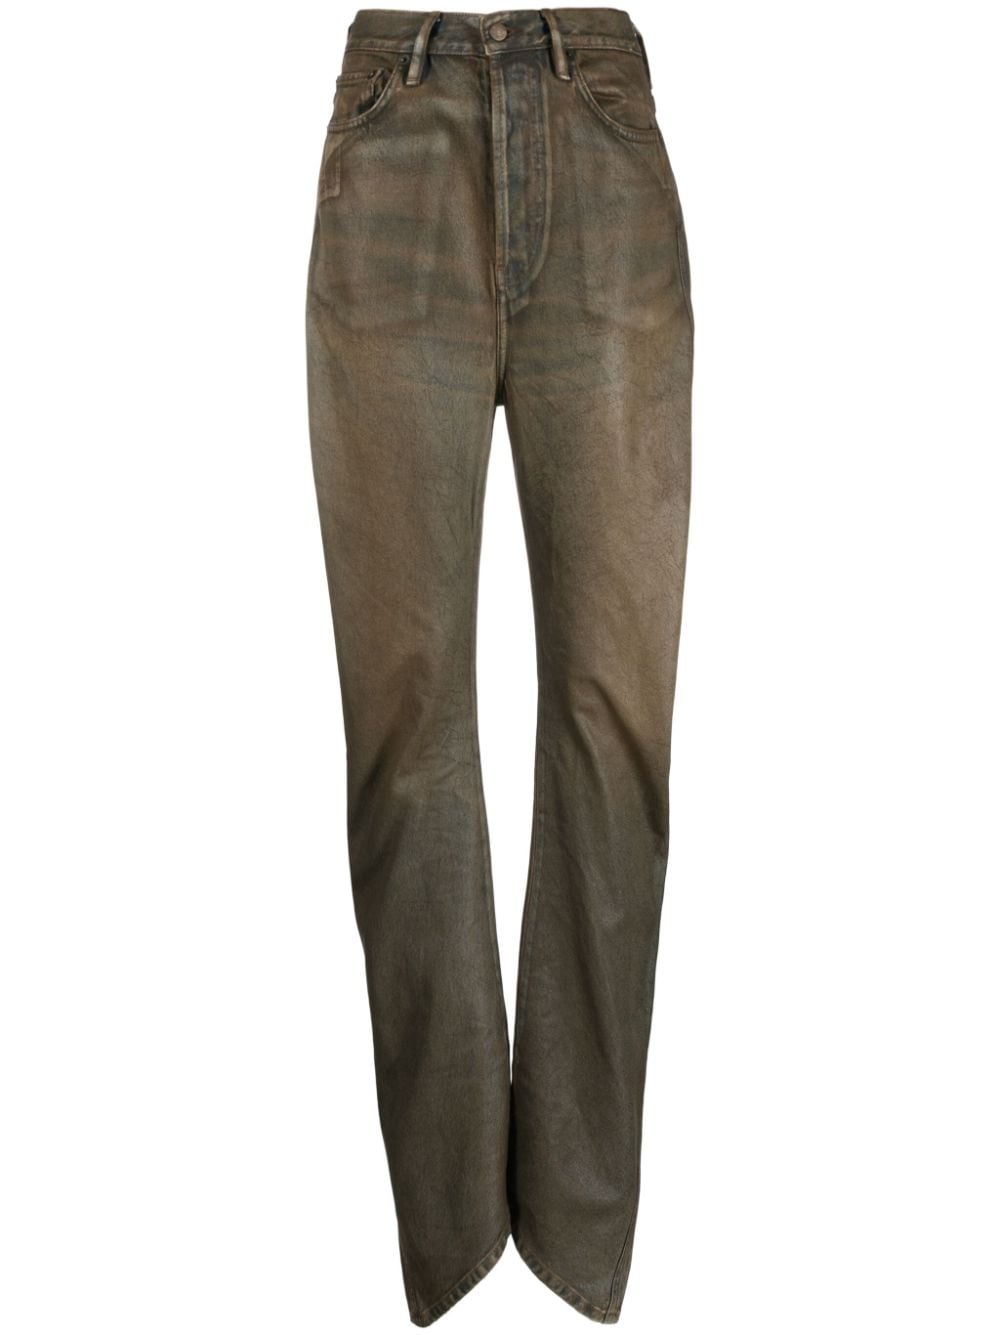 Acne Studios relaxed fit coated jeans - Brown von Acne Studios